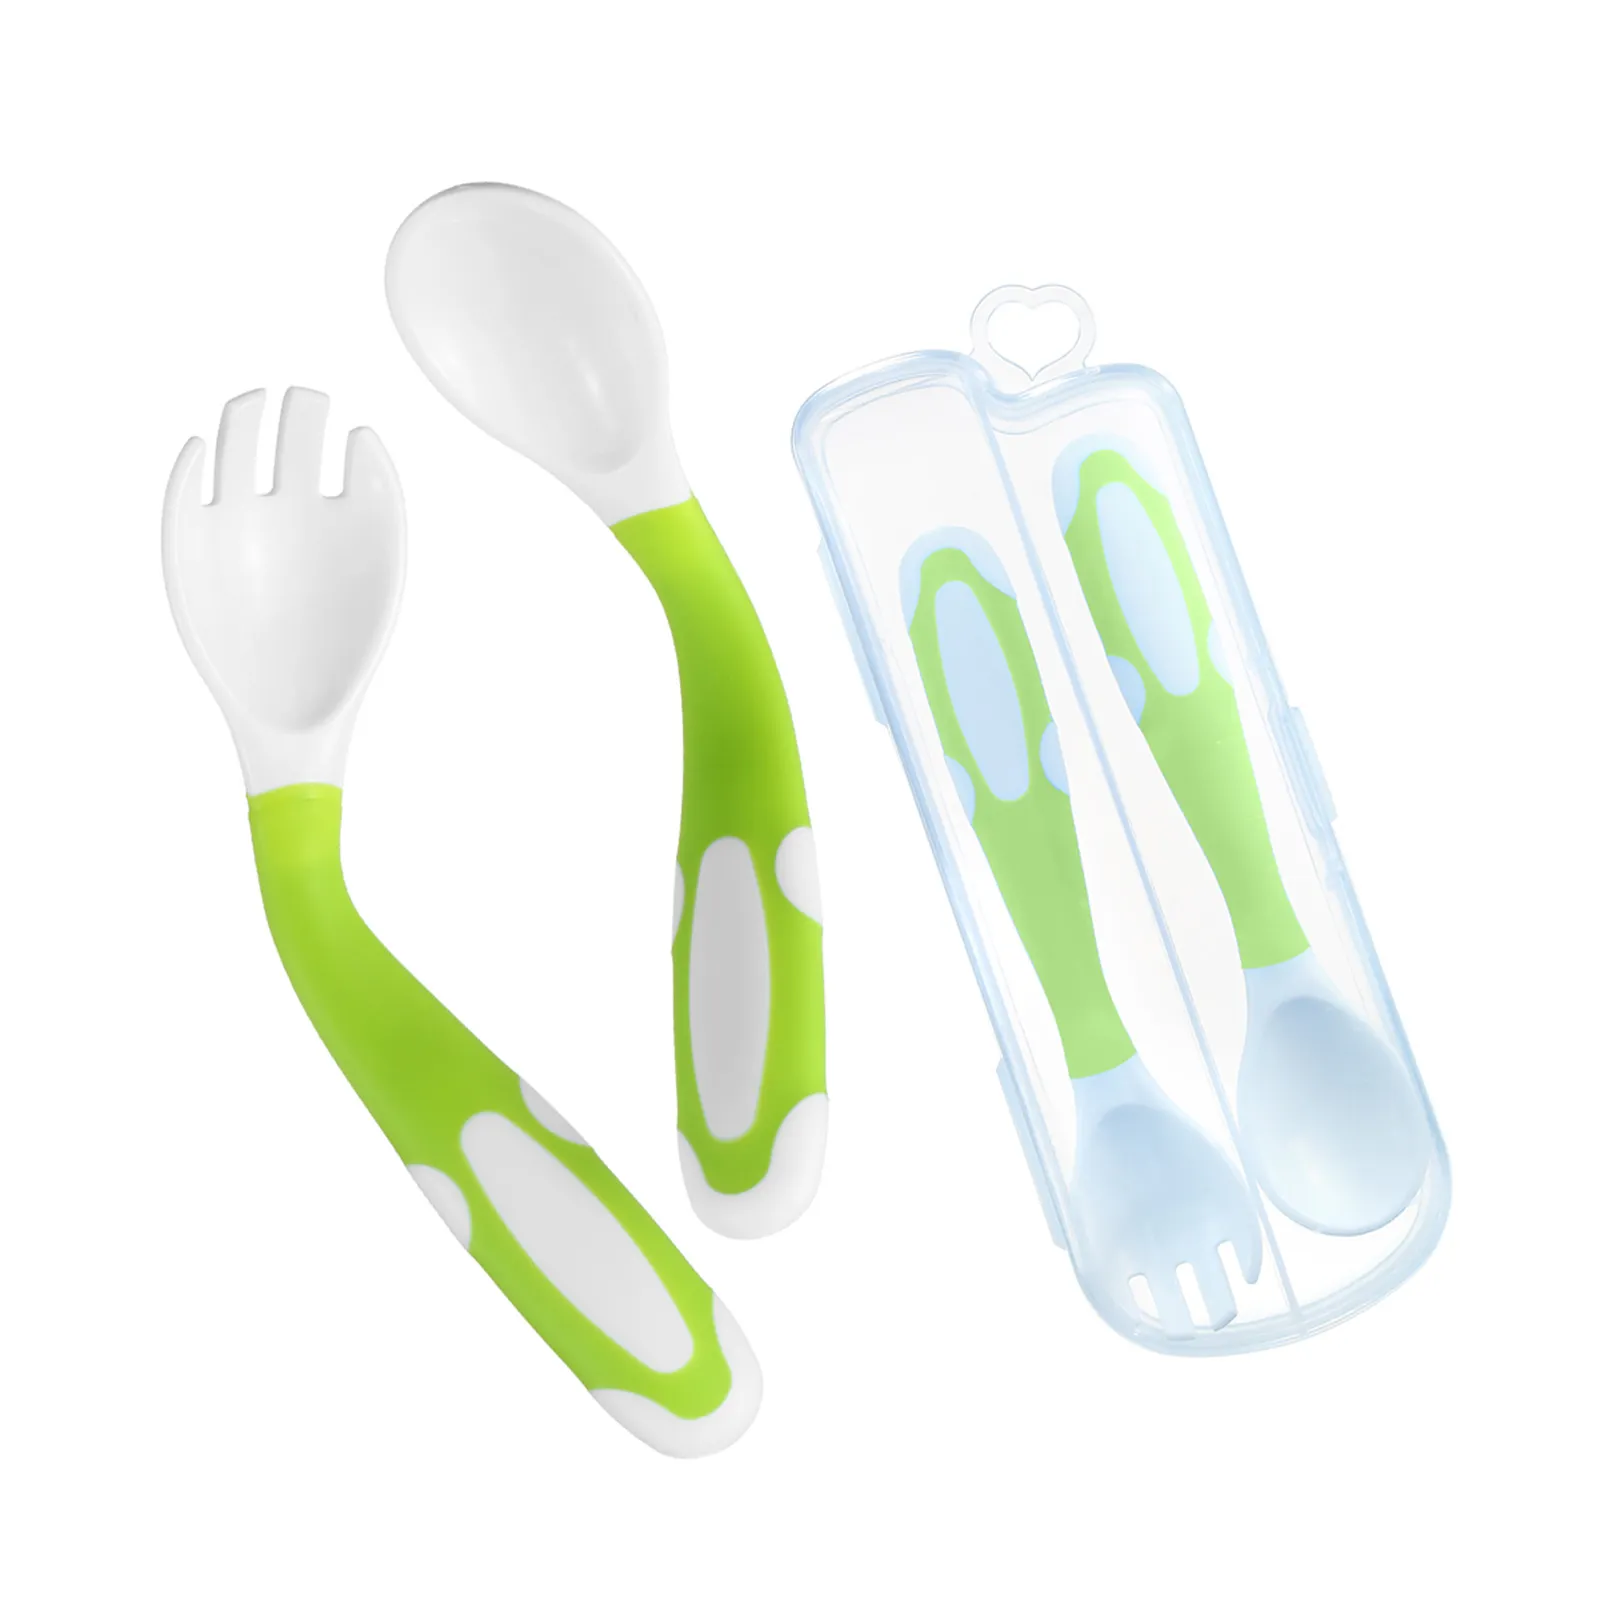 2Pcs Silicone Spoon for Baby Utensils Set Auxiliary Food Toddler Learn To Eat Training Bendable Soft